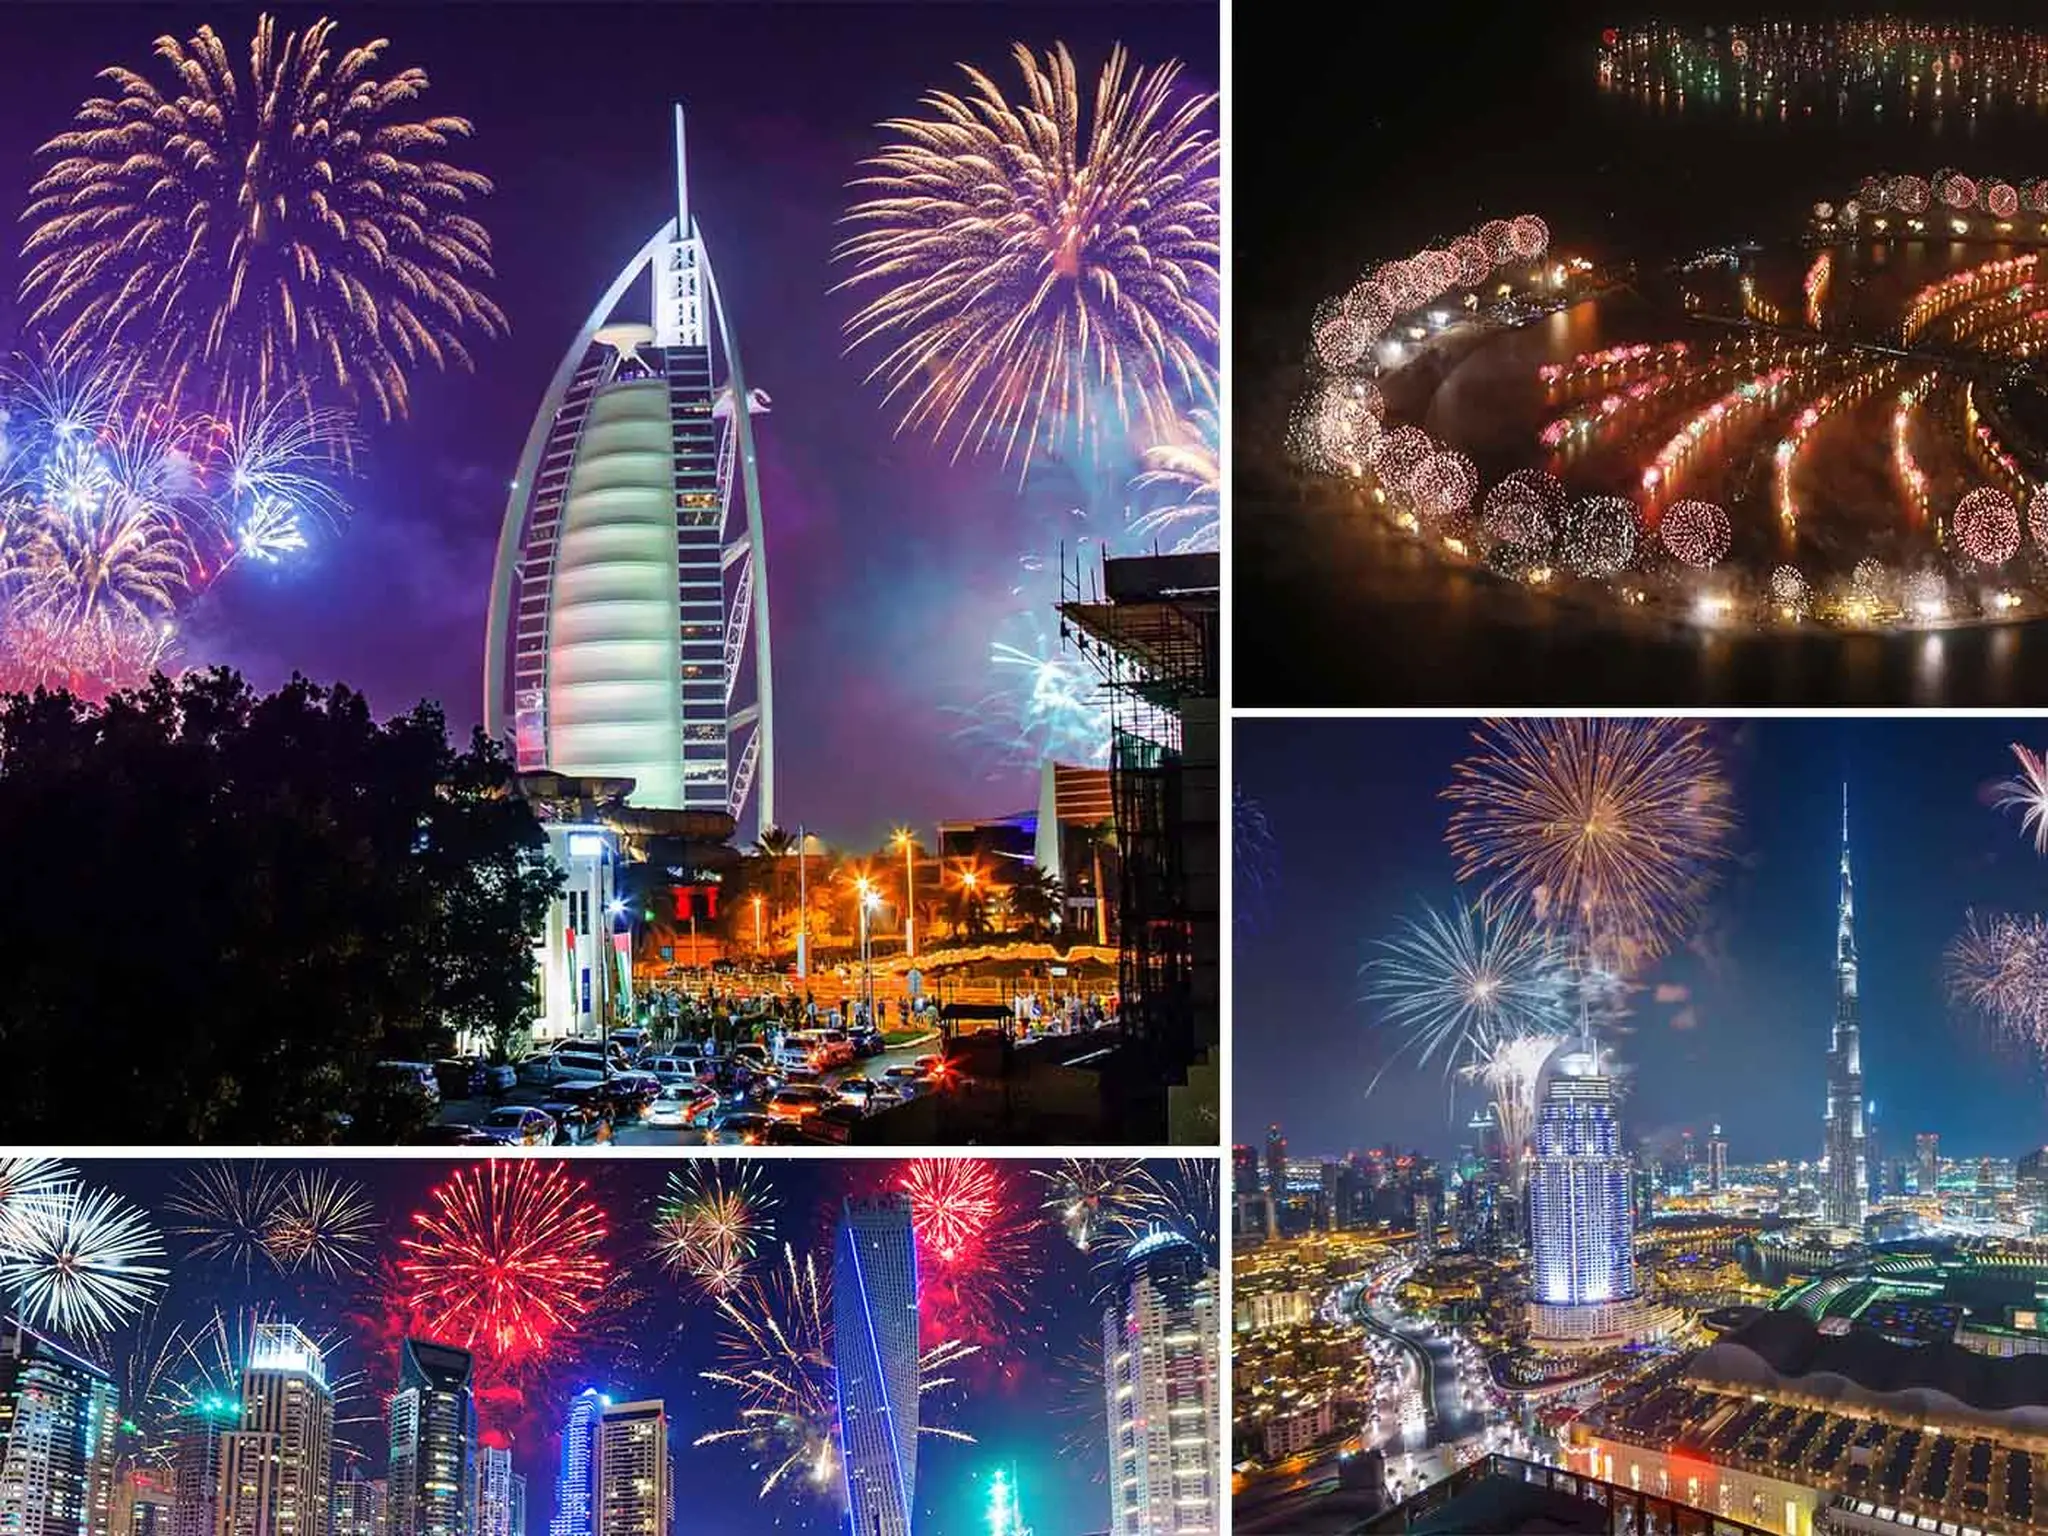 The UAE decides to close the Burj Khalifa Metro and Boulevard during the New Year celebrations